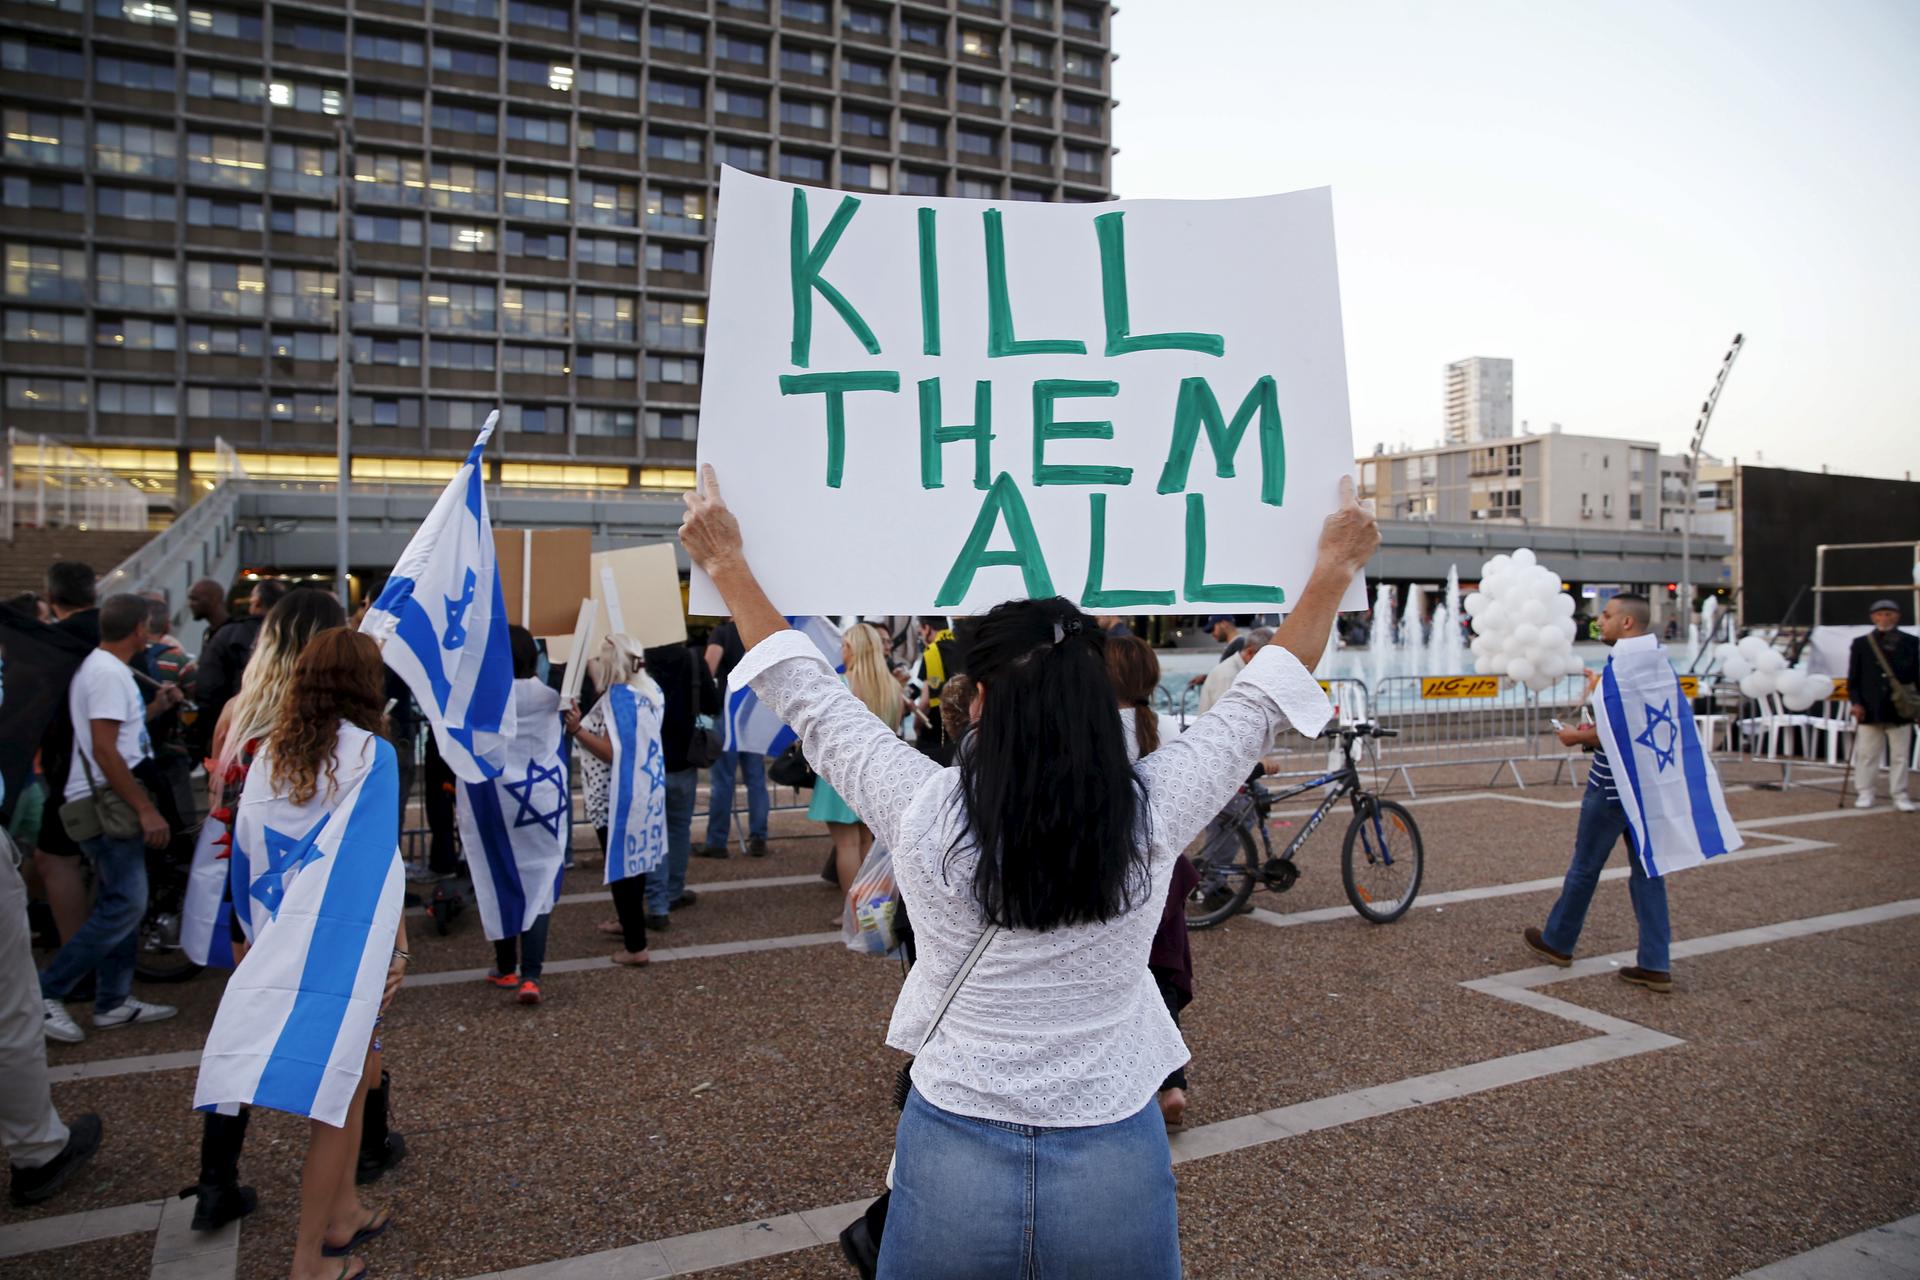 A supporter of Isralei solder Elor Azaria in Tel Aviv holds a sign saying "Kill them all" on April 19, 2016.